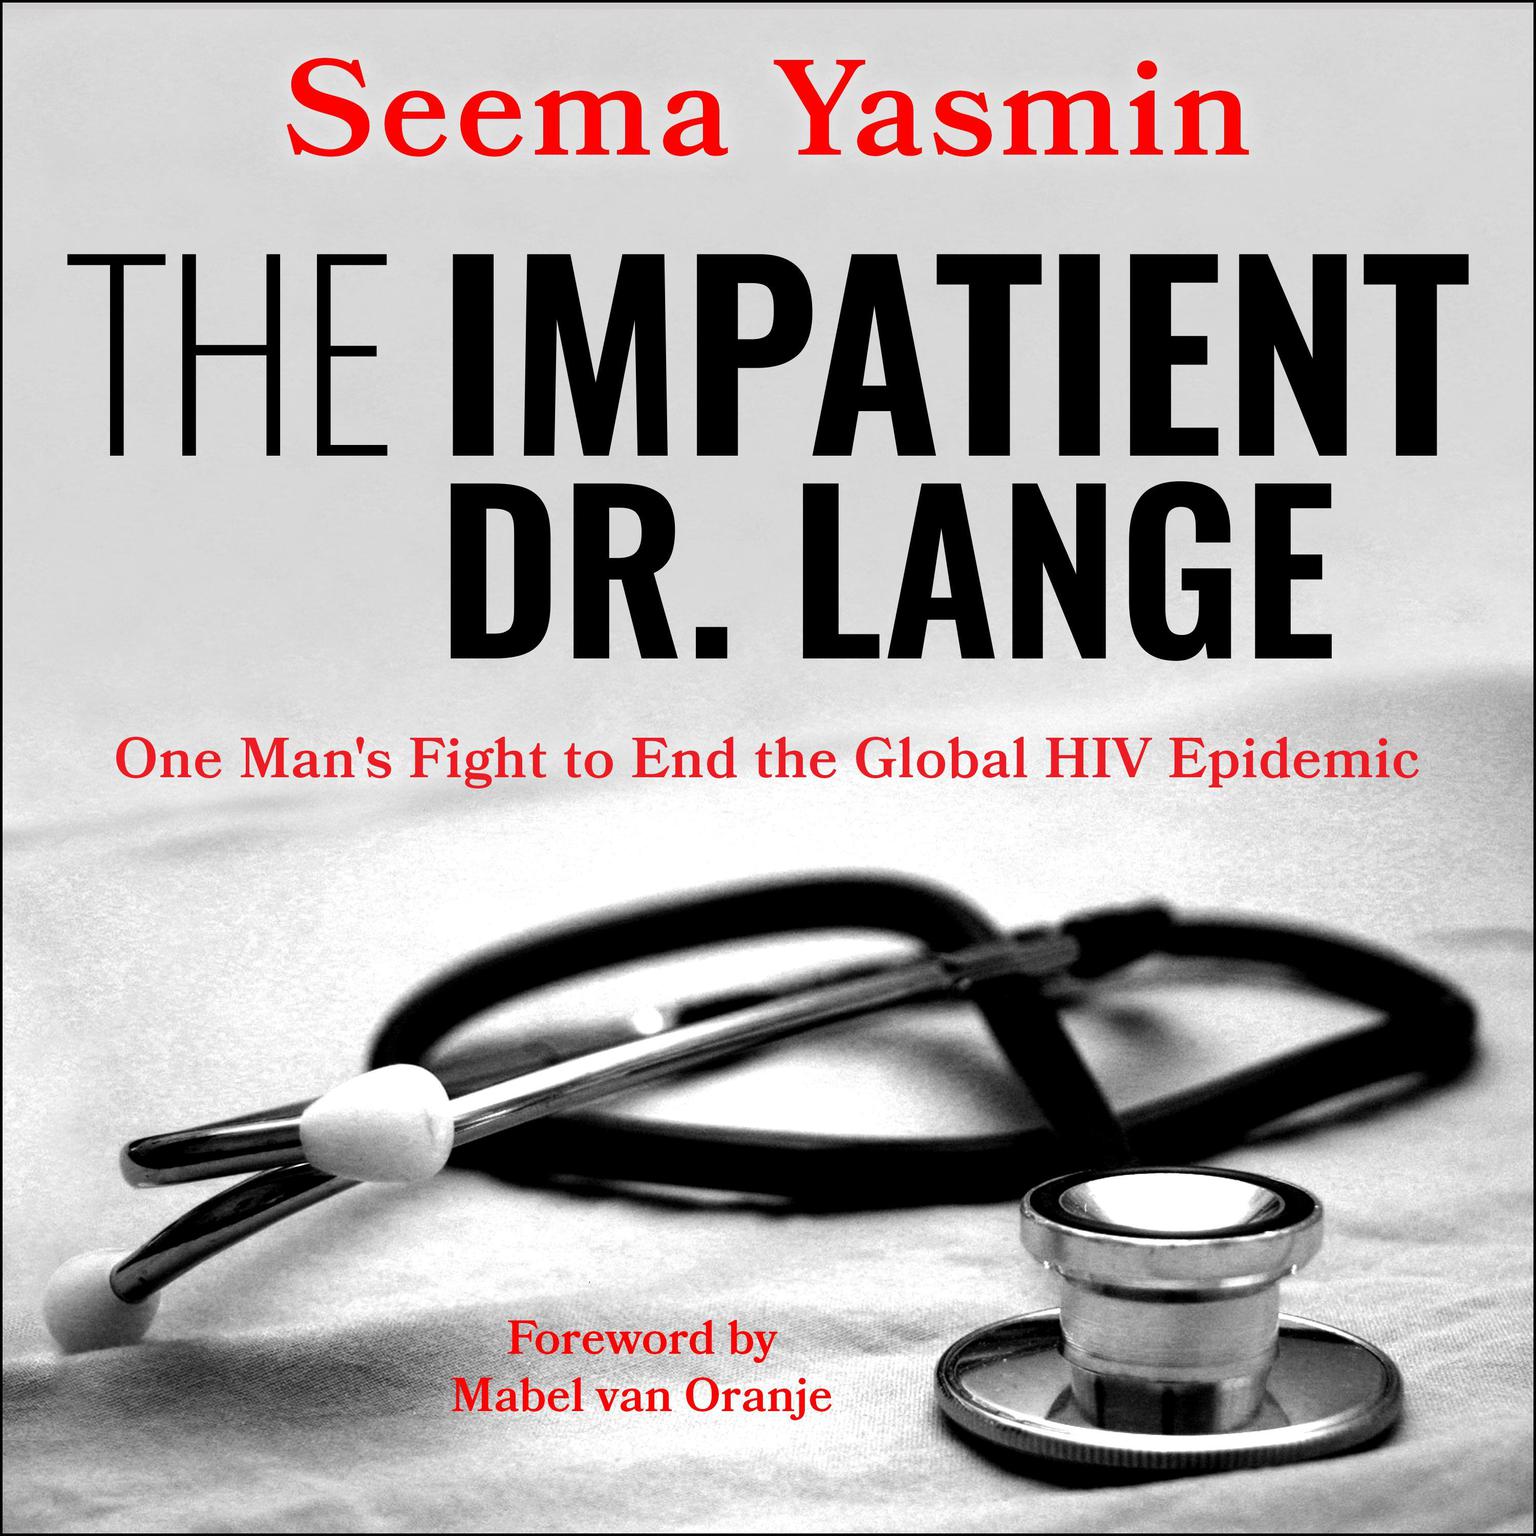 The Impatient Dr. Lange: One Mans Fight to End the Global HIV Epidemic Audiobook, by Seema Yasmin